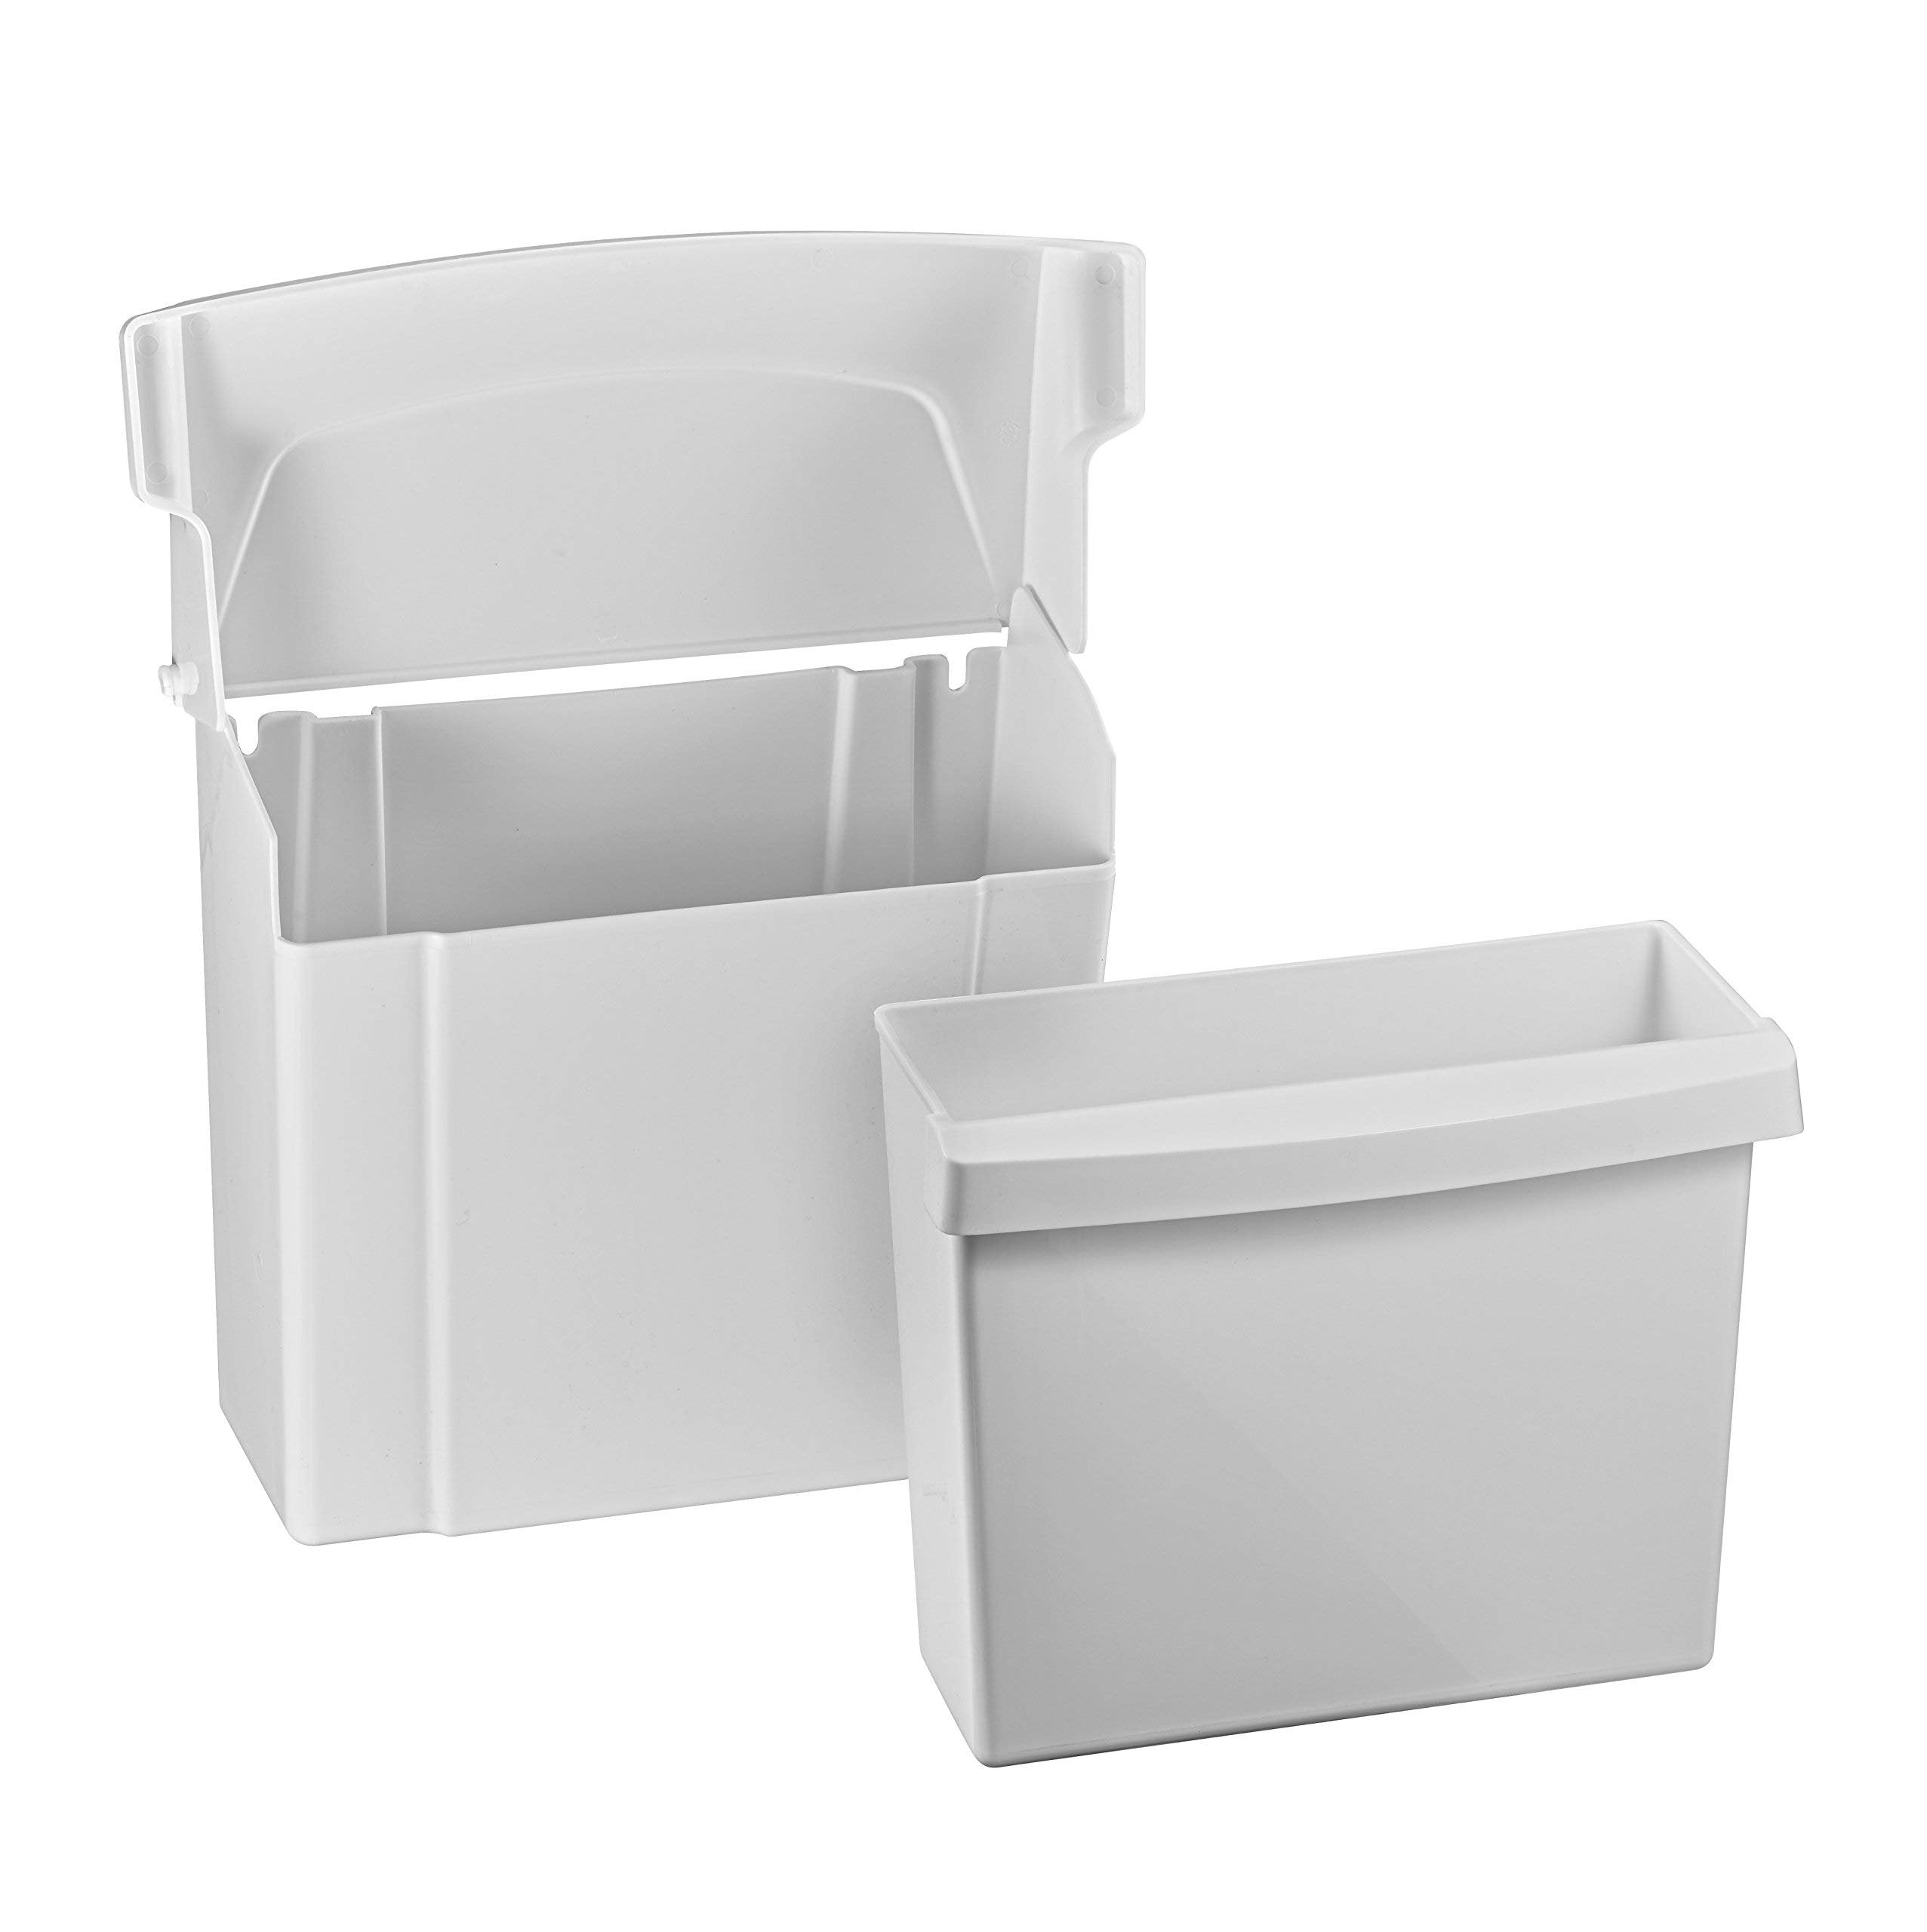 Alpine Sanitary Napkins Receptacle - Hygiene Products, Tampon & Waste Disposal Container - Durable ABS Plastic - Seals Tightly & Traps Odors -Easy Installation Hardware Included (White)